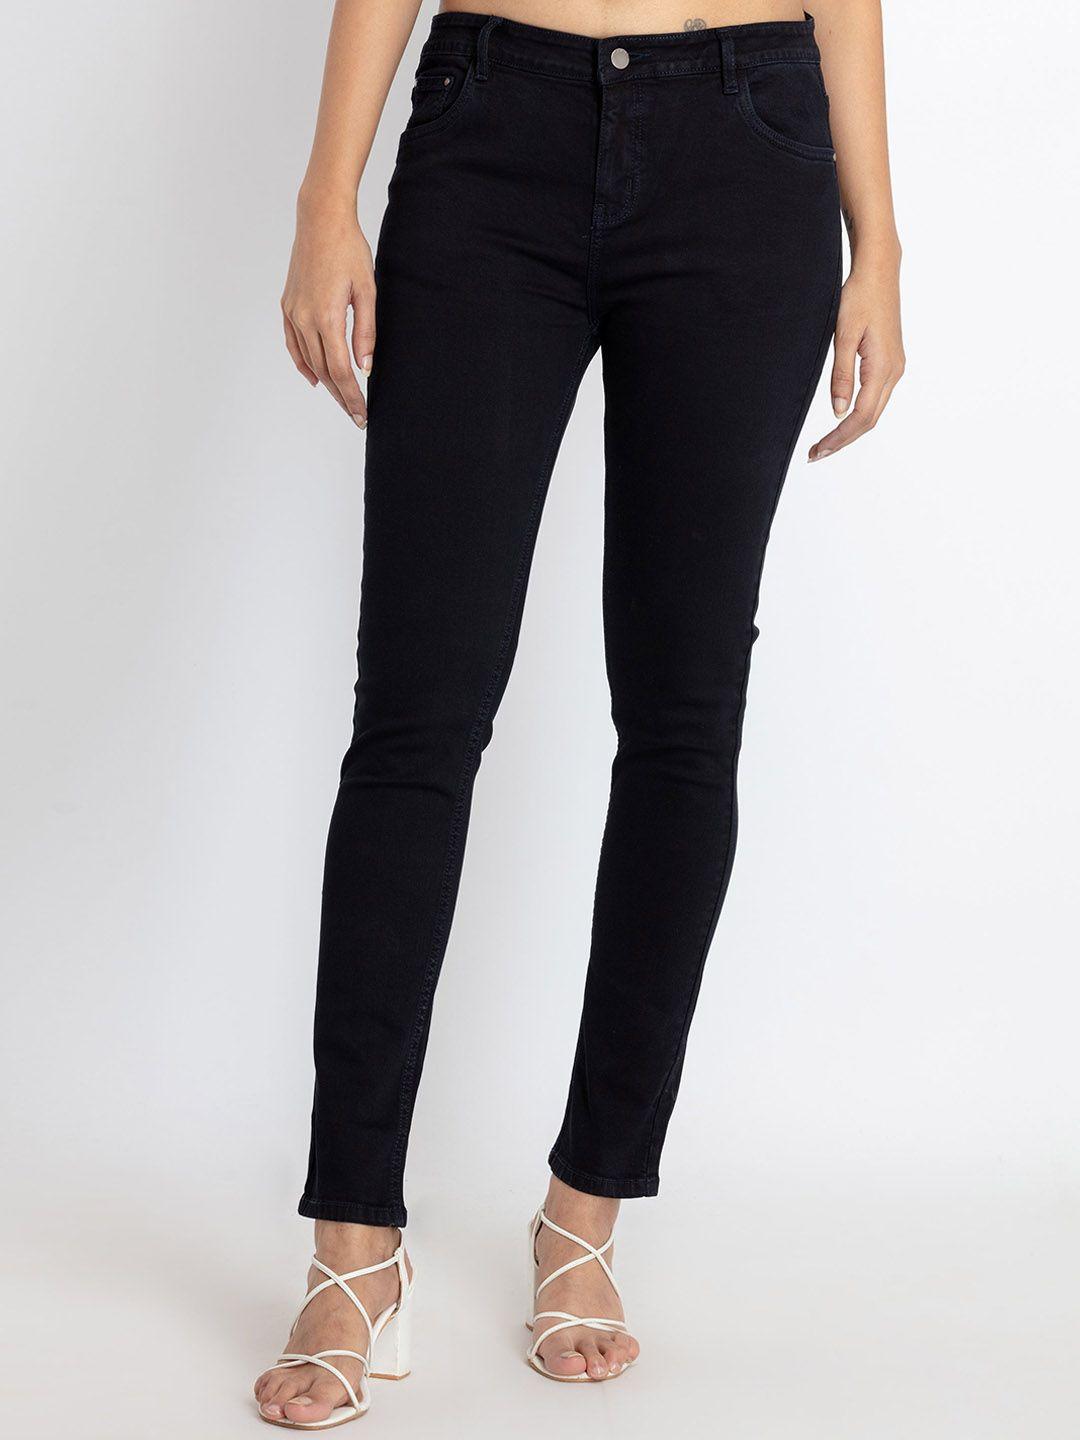 status quo women skinny fit mid-rise cotton jeans